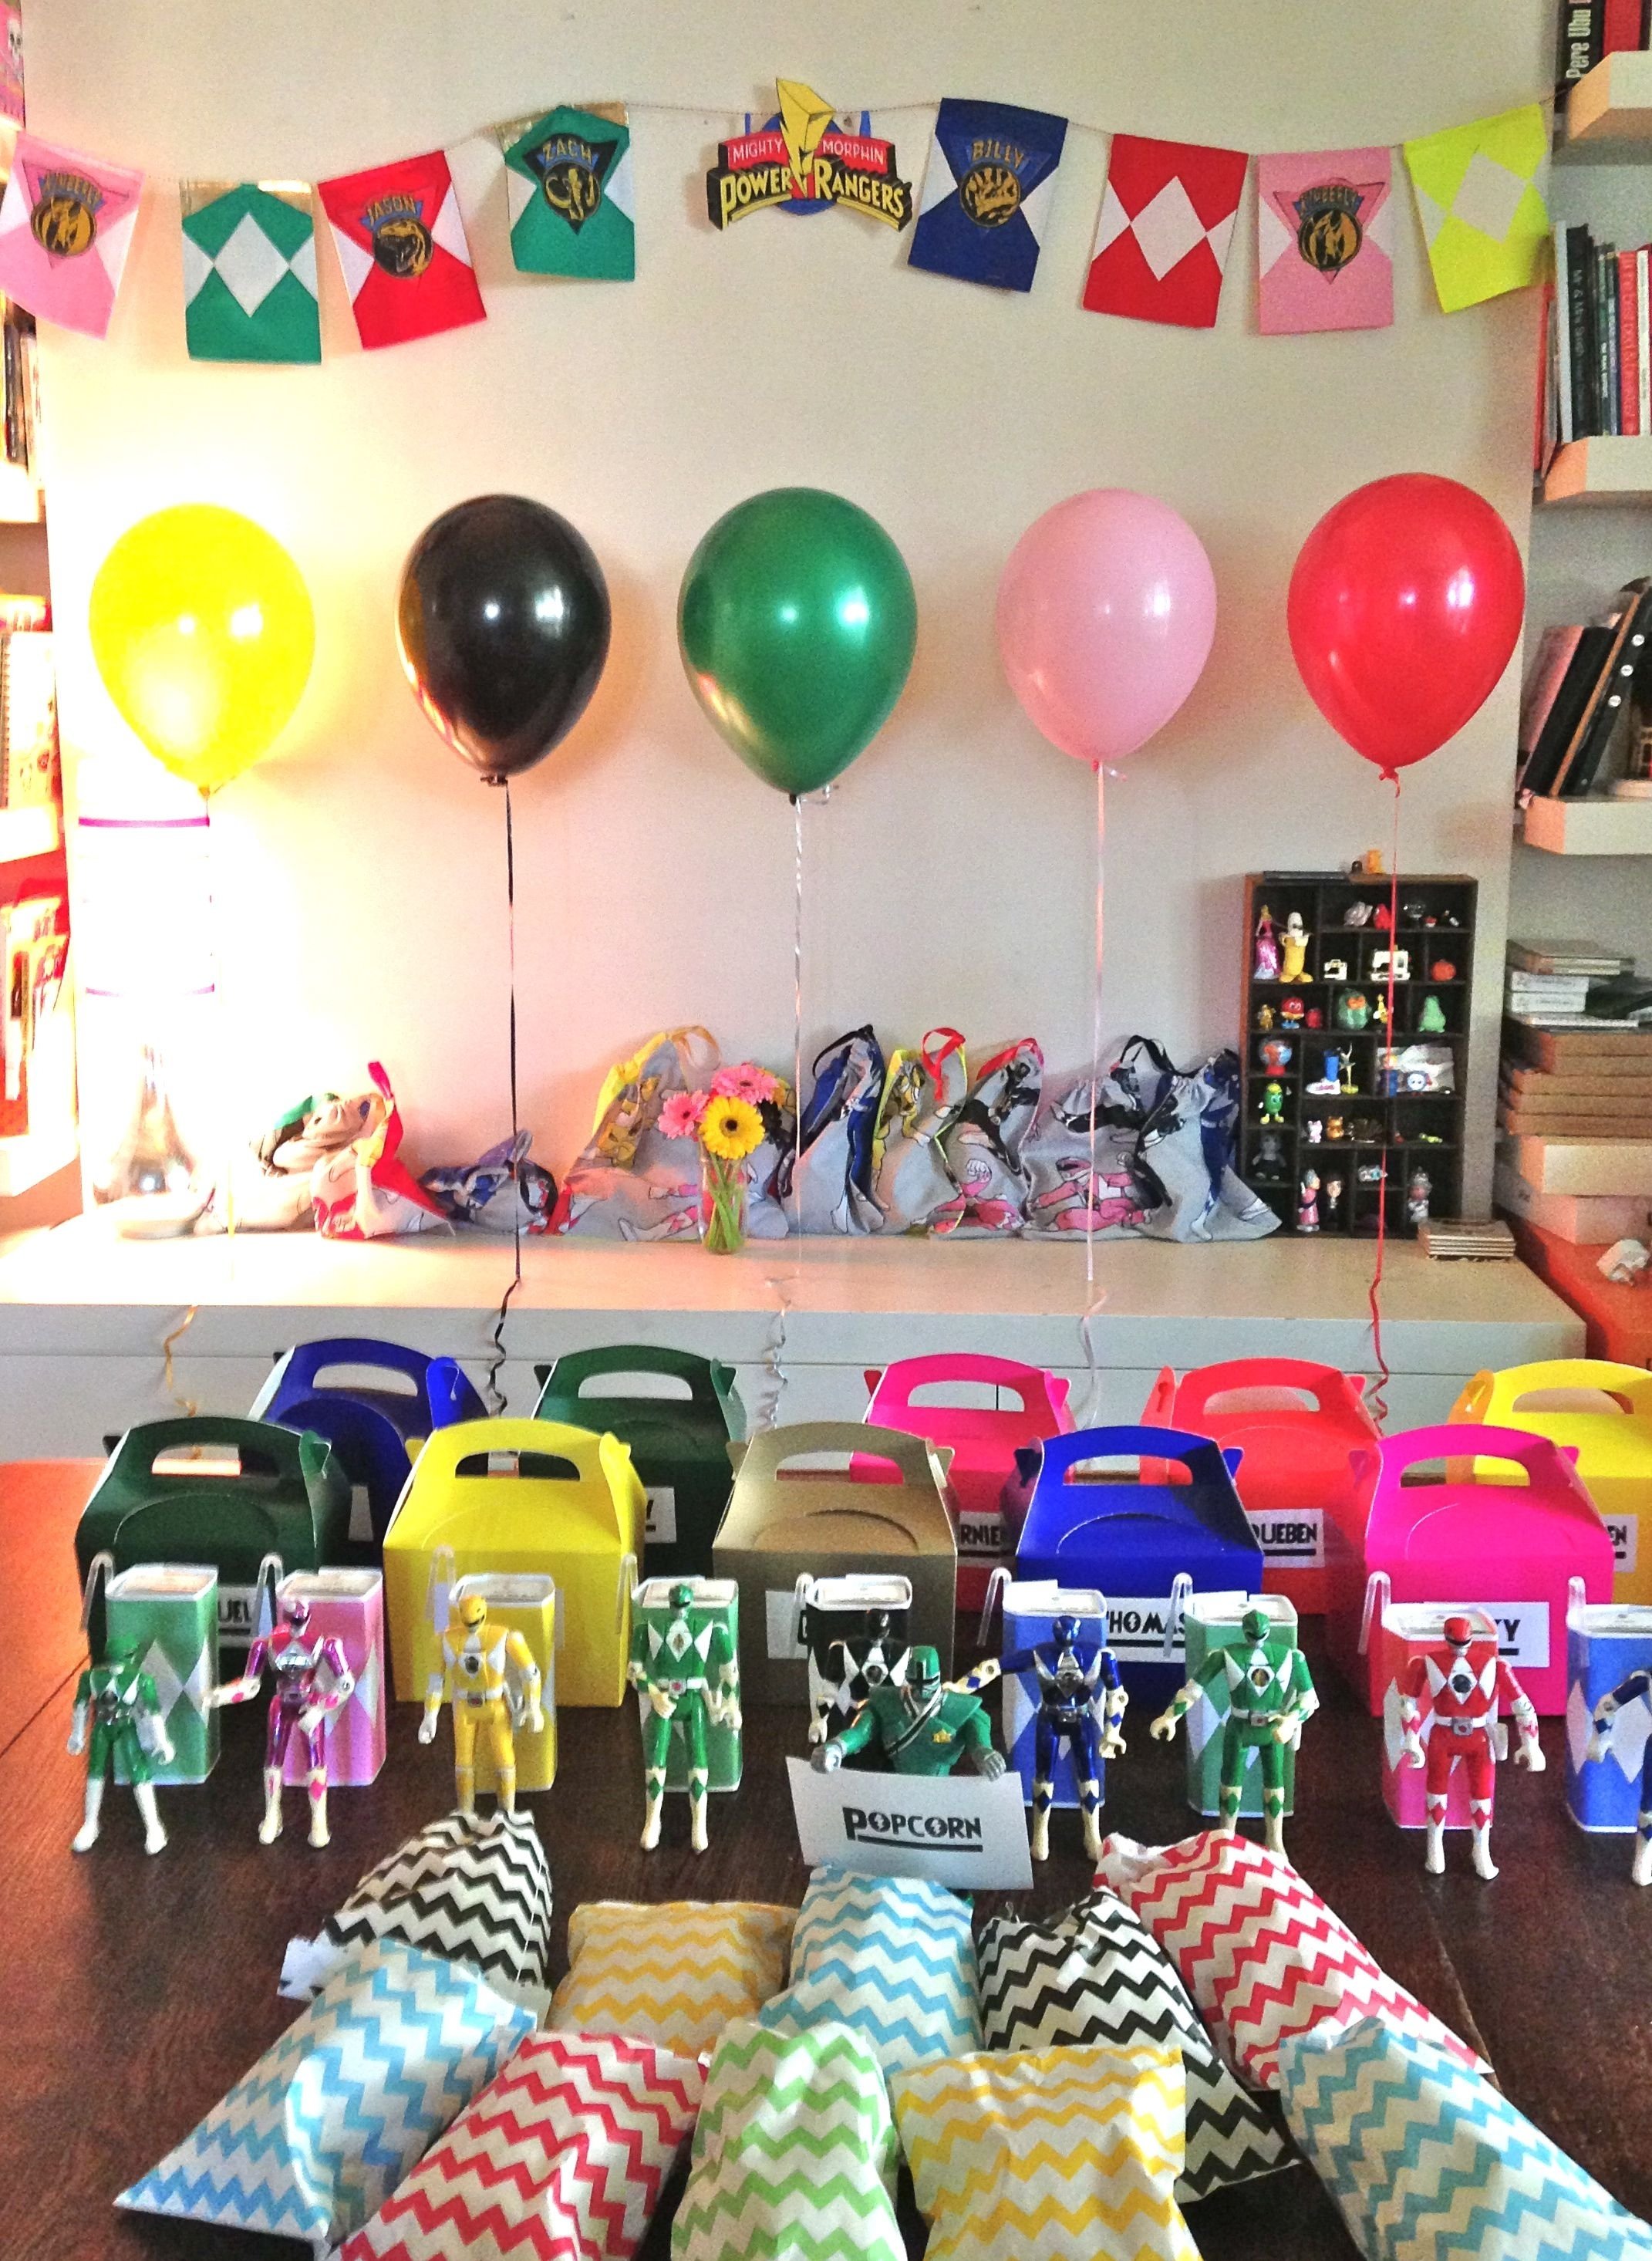 10 Unique Power Rangers Birthday Party Ideas img 9131 2142x2931 pixels products i love pinterest 2022